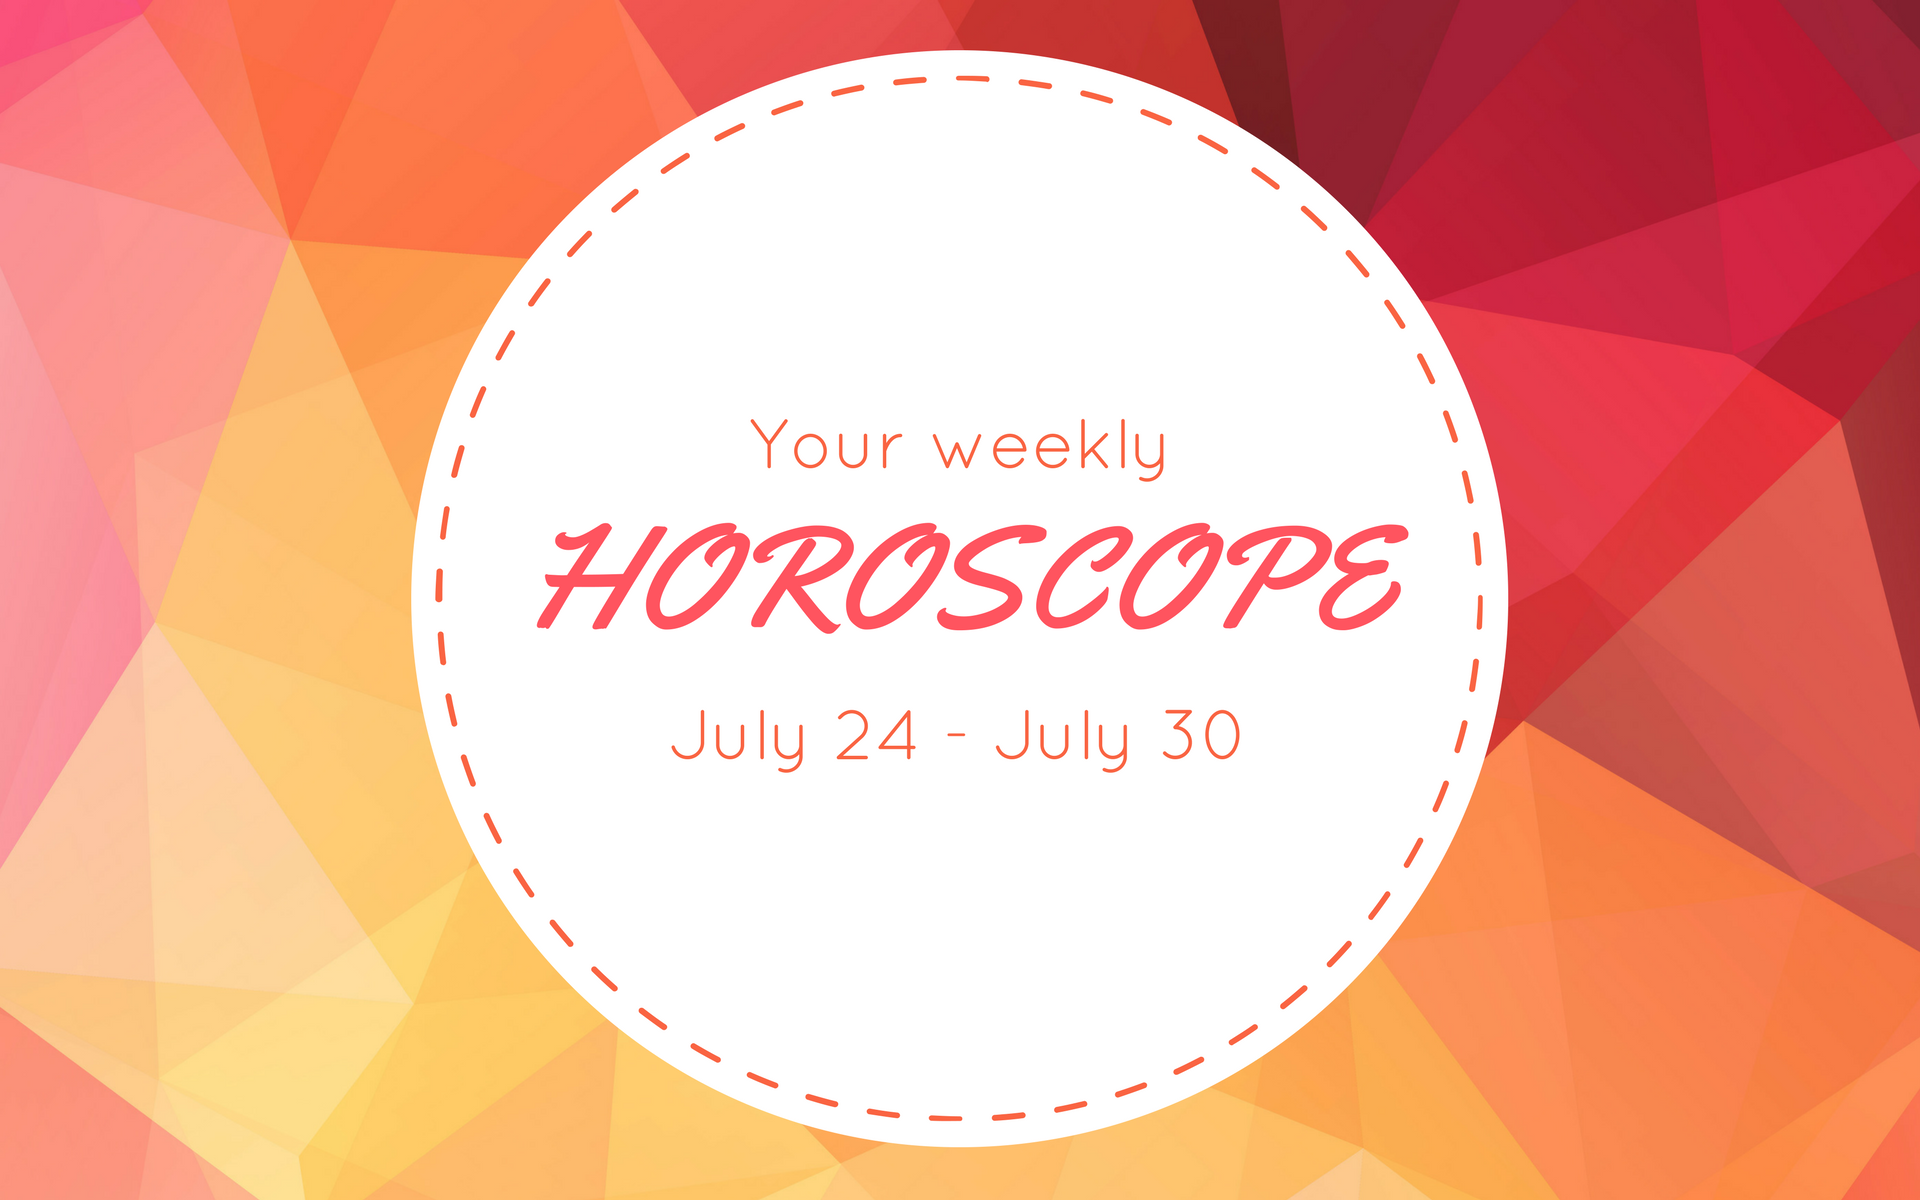 Your Weekly Horoscope: July 24 - July 30